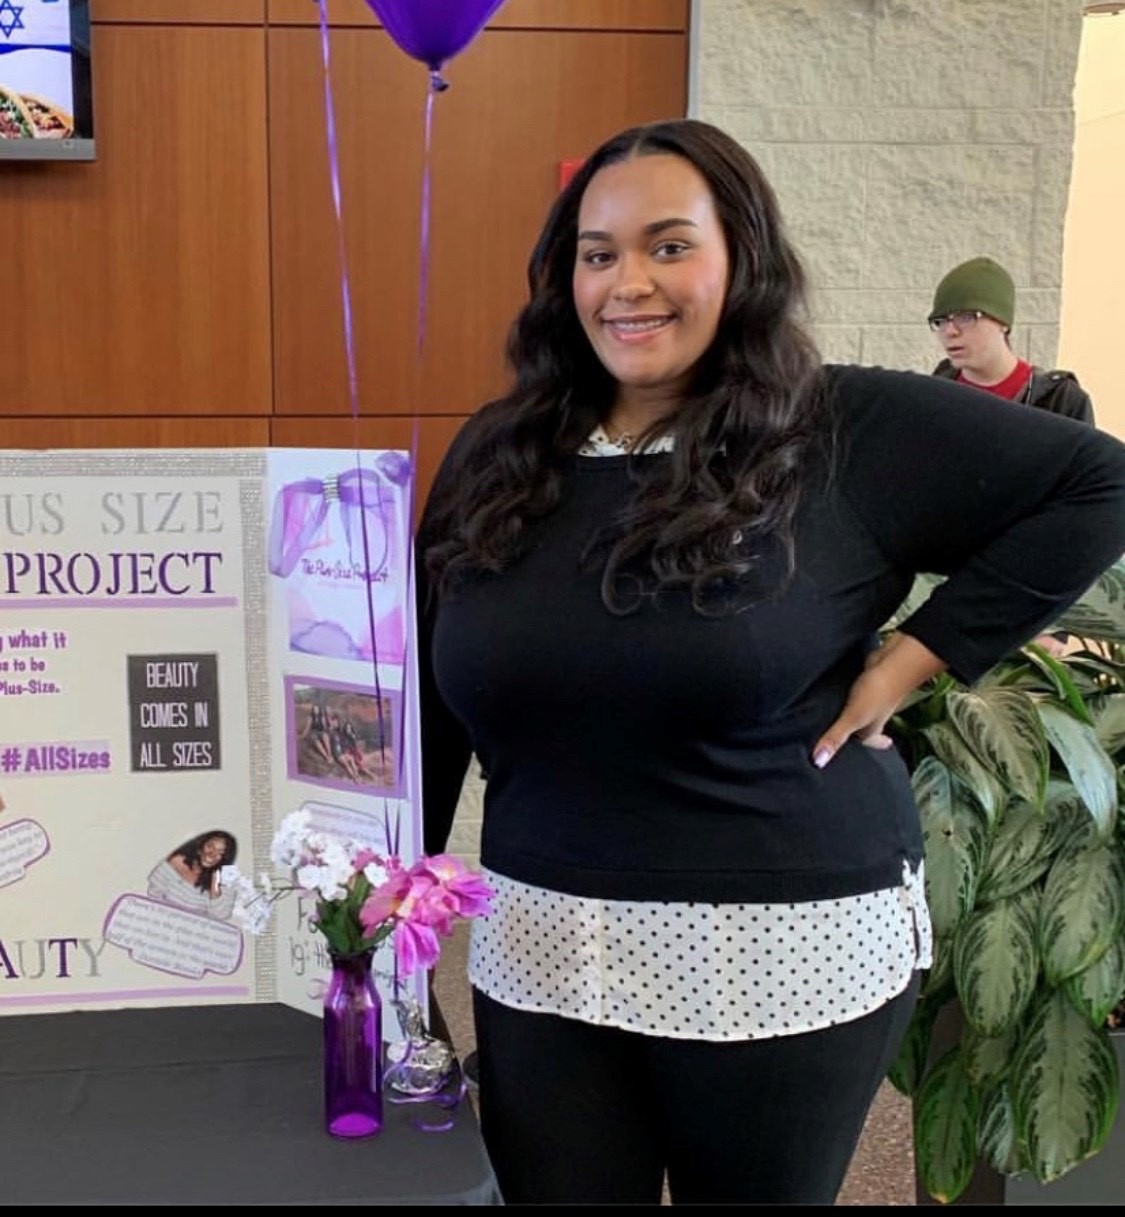 Senior Ahmiya Jones stand next to a poster explaining what The Plus-Size Project at Stockton University is